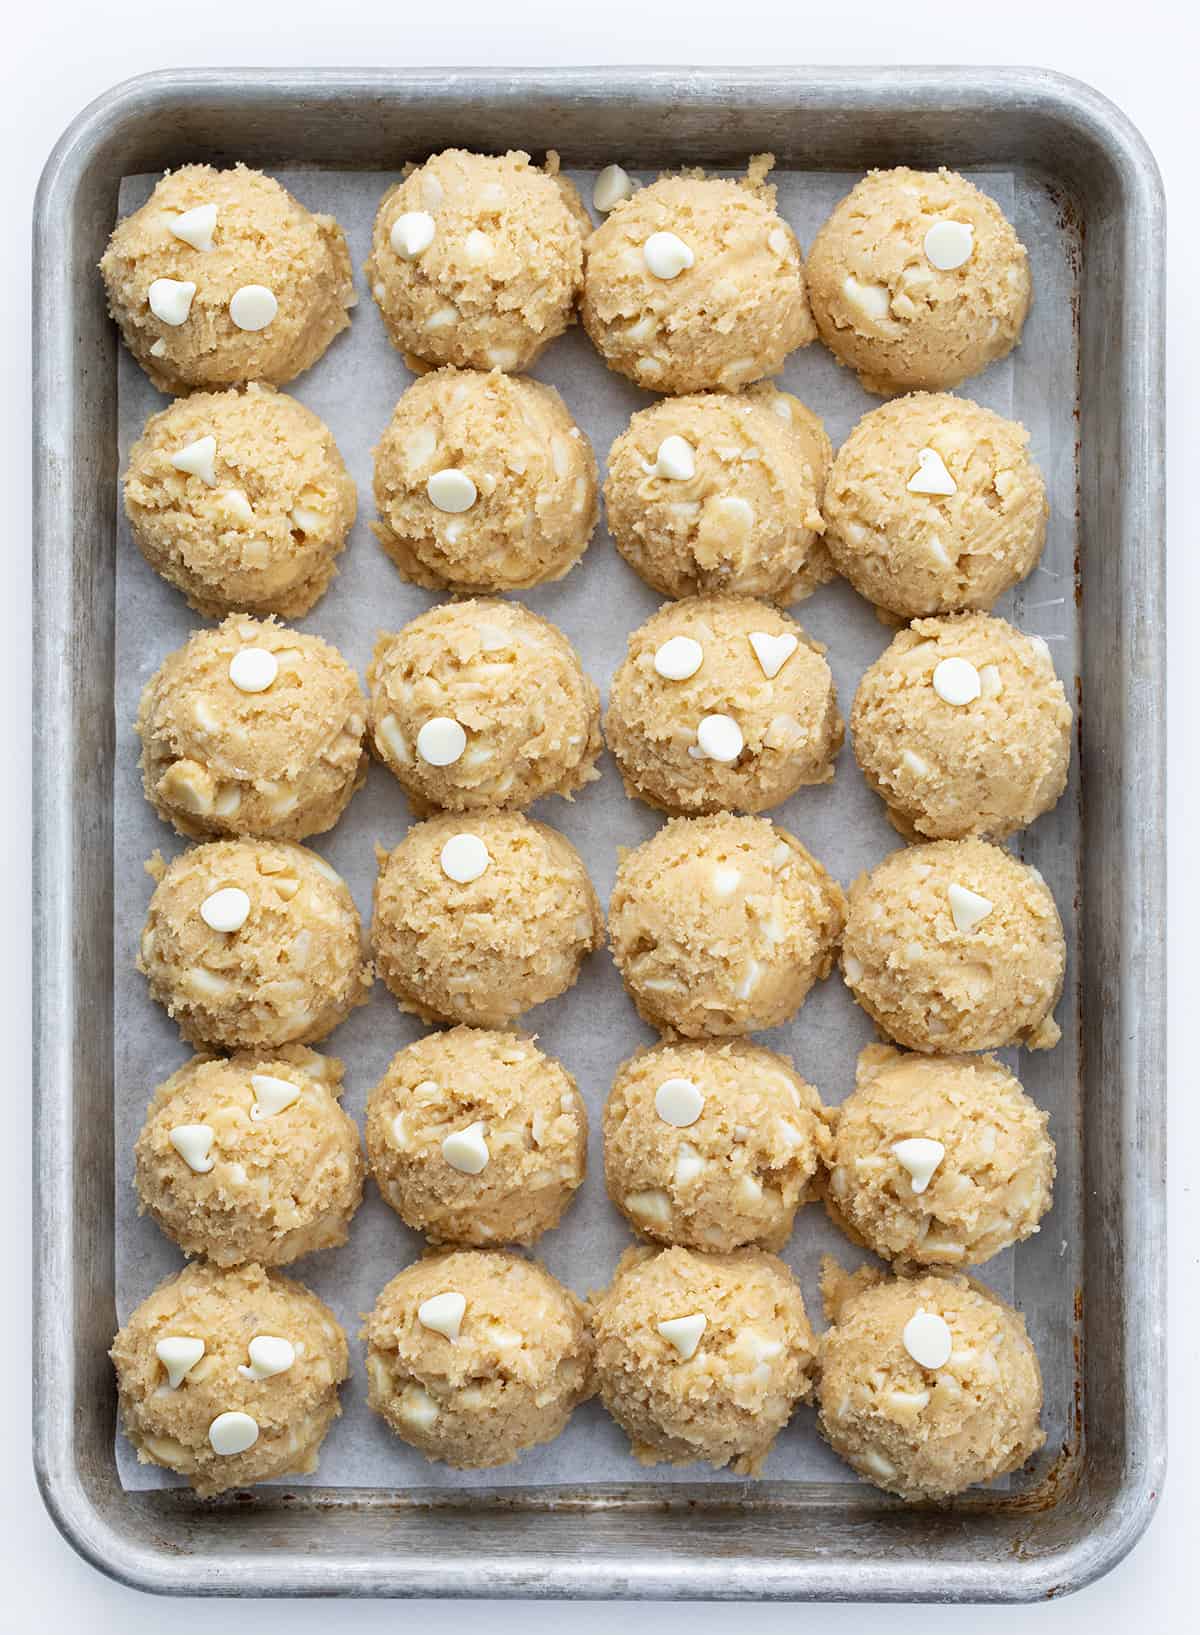 Raw White Chocolate Macadamia Nut Cookie Batter in Scoops on a Baking Sheet.